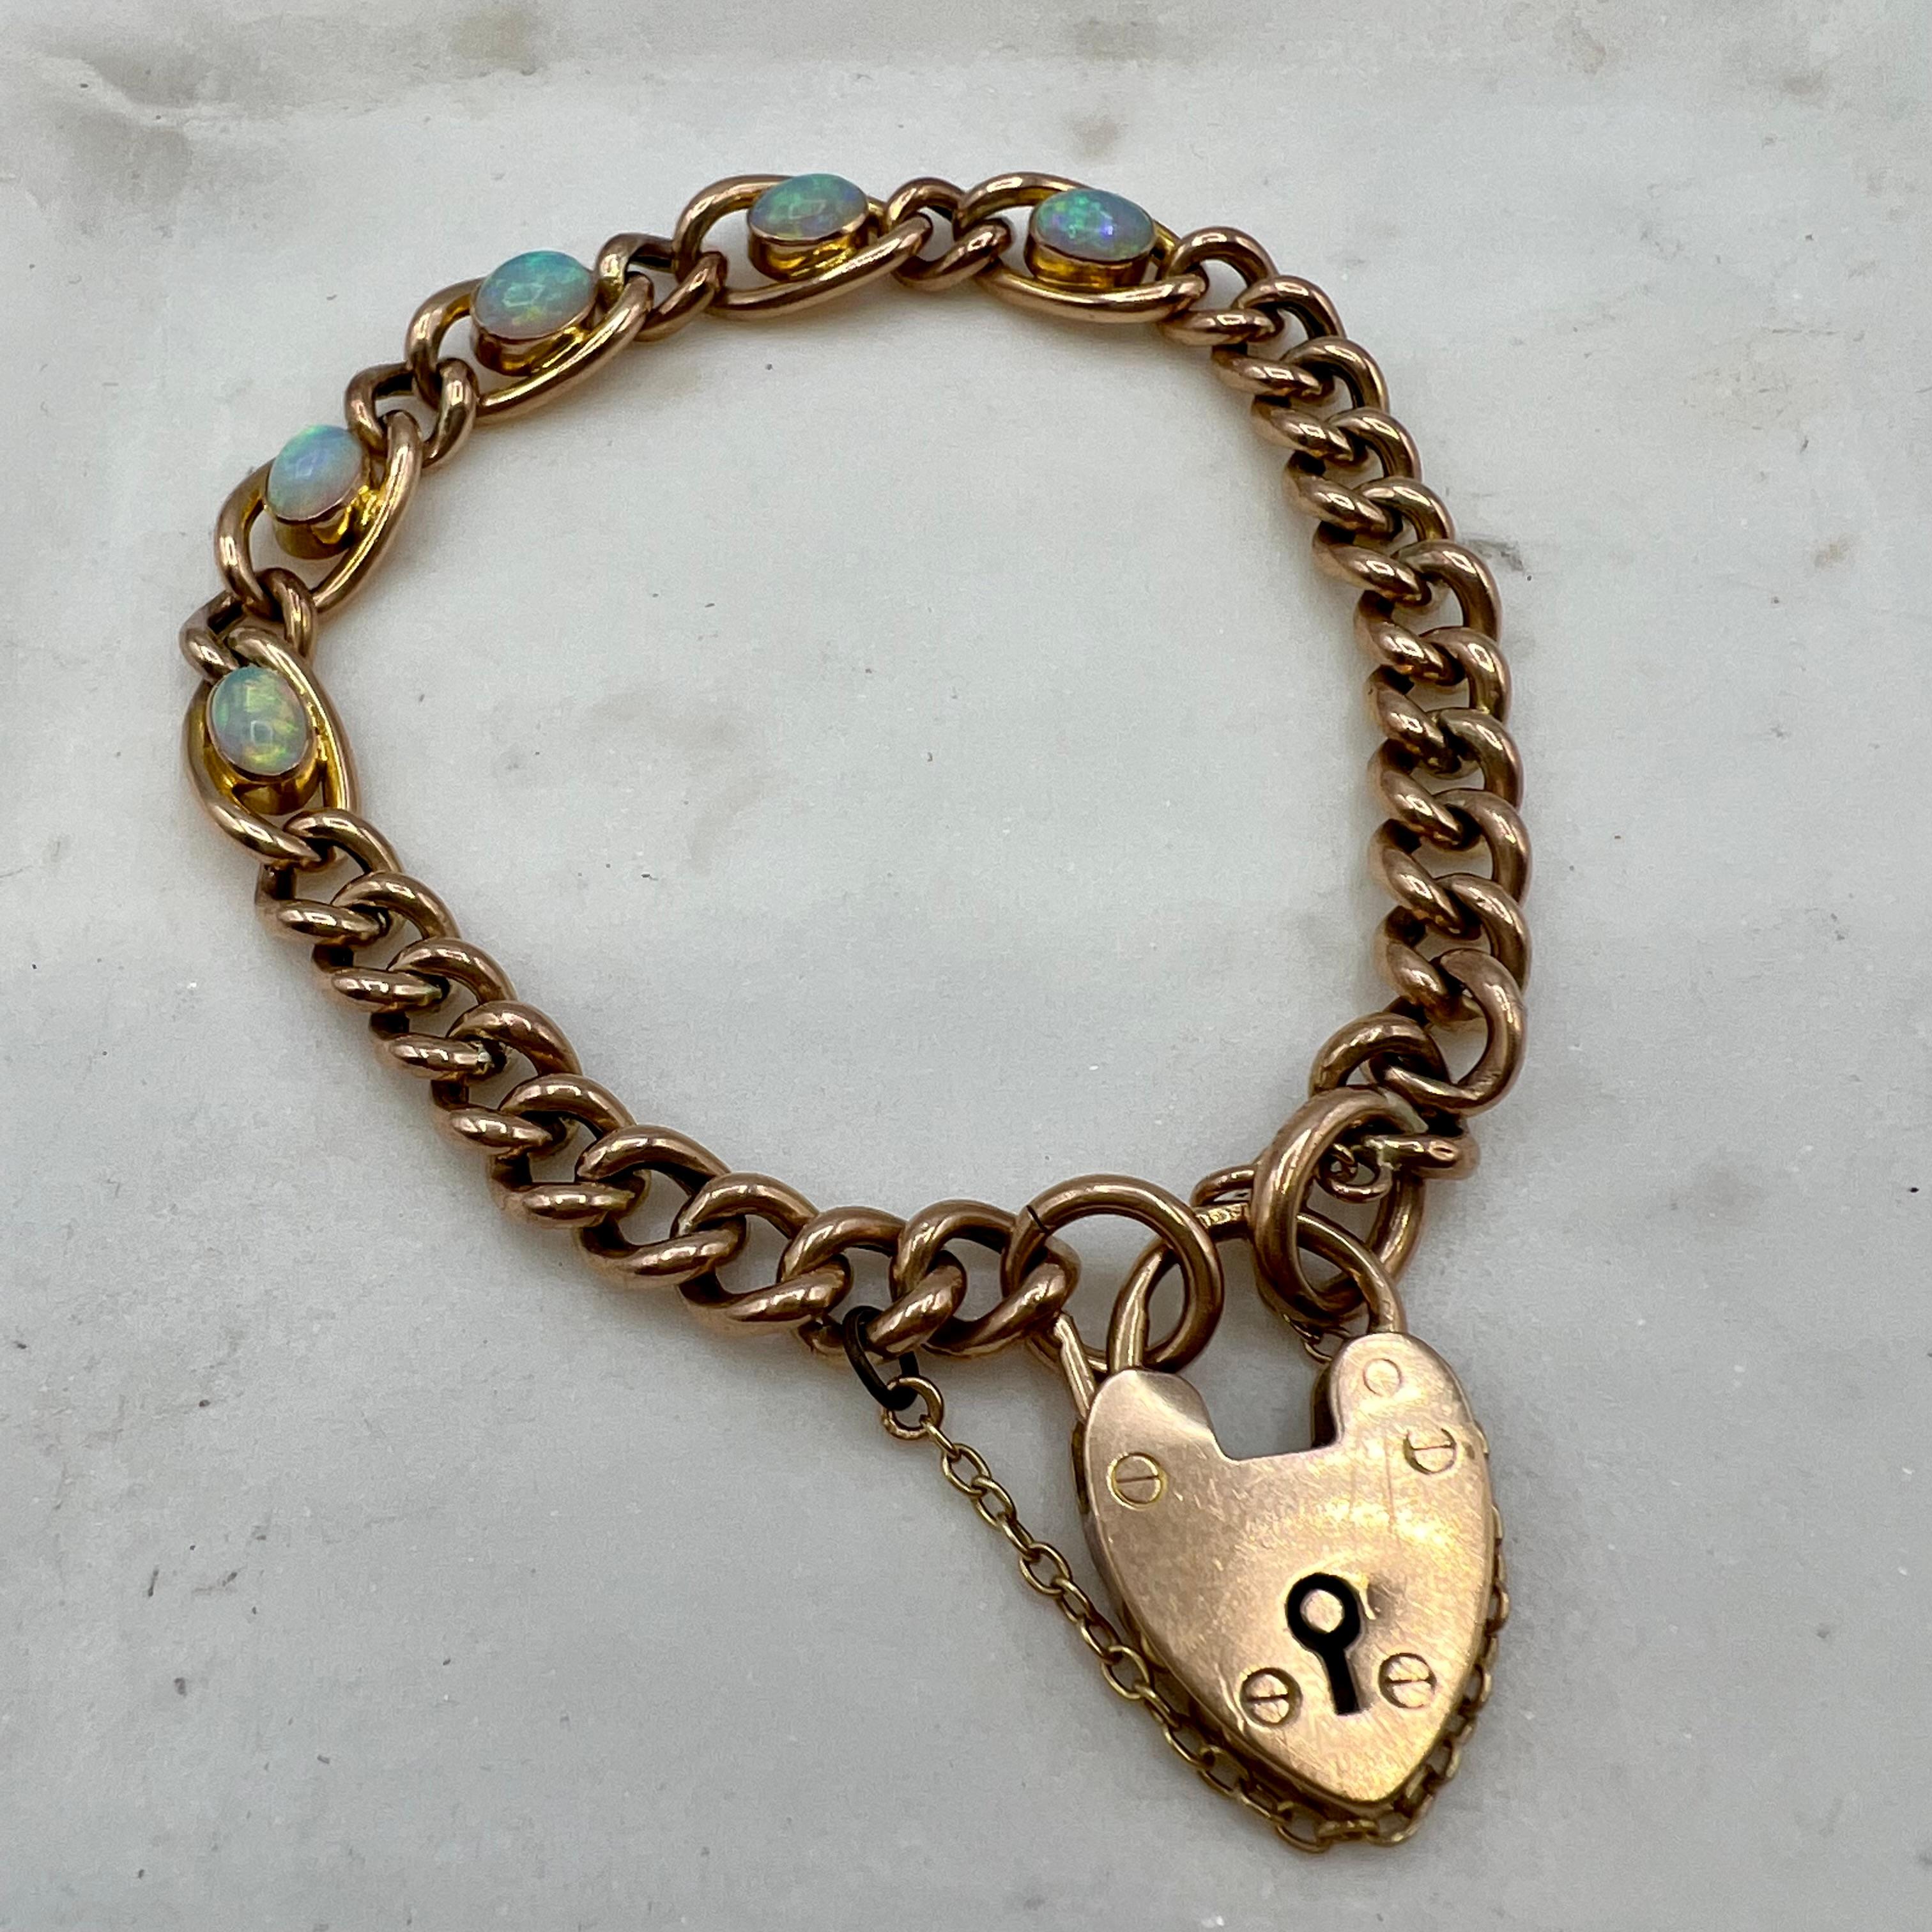 This traditional heart locket bracelet is 9 carat rose gold with a stamped hallmarks heart lock. The stones are Australian opals and are beautifully matched. This is a lovely bracelet to add to any collection.